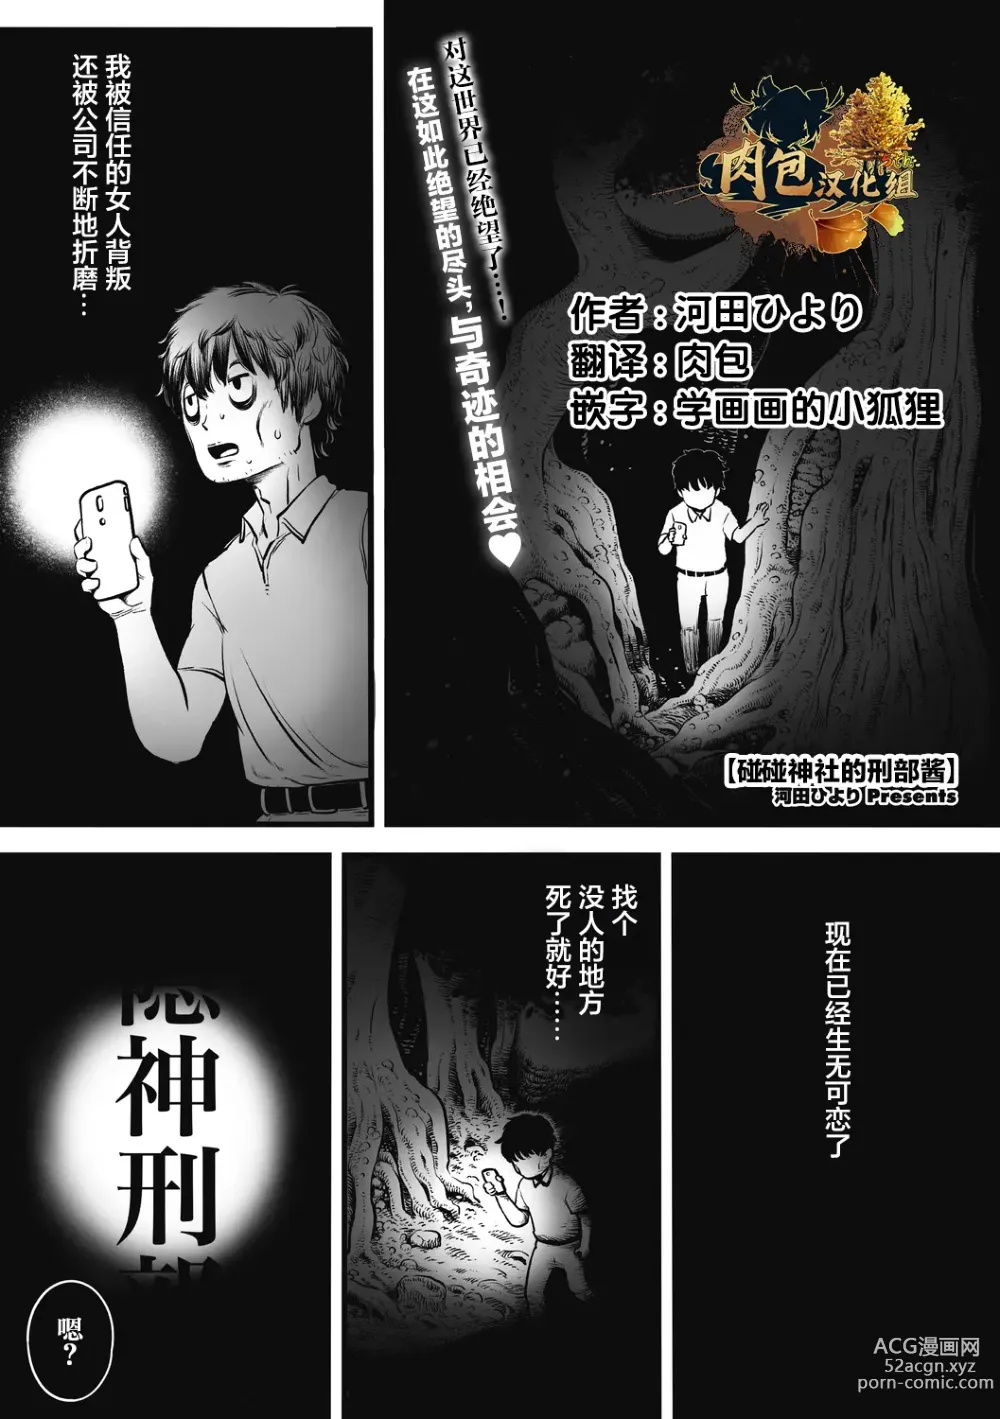 Page 1 of doujinshi 刑部河田ひより（肉包汉化组）（Chinese）